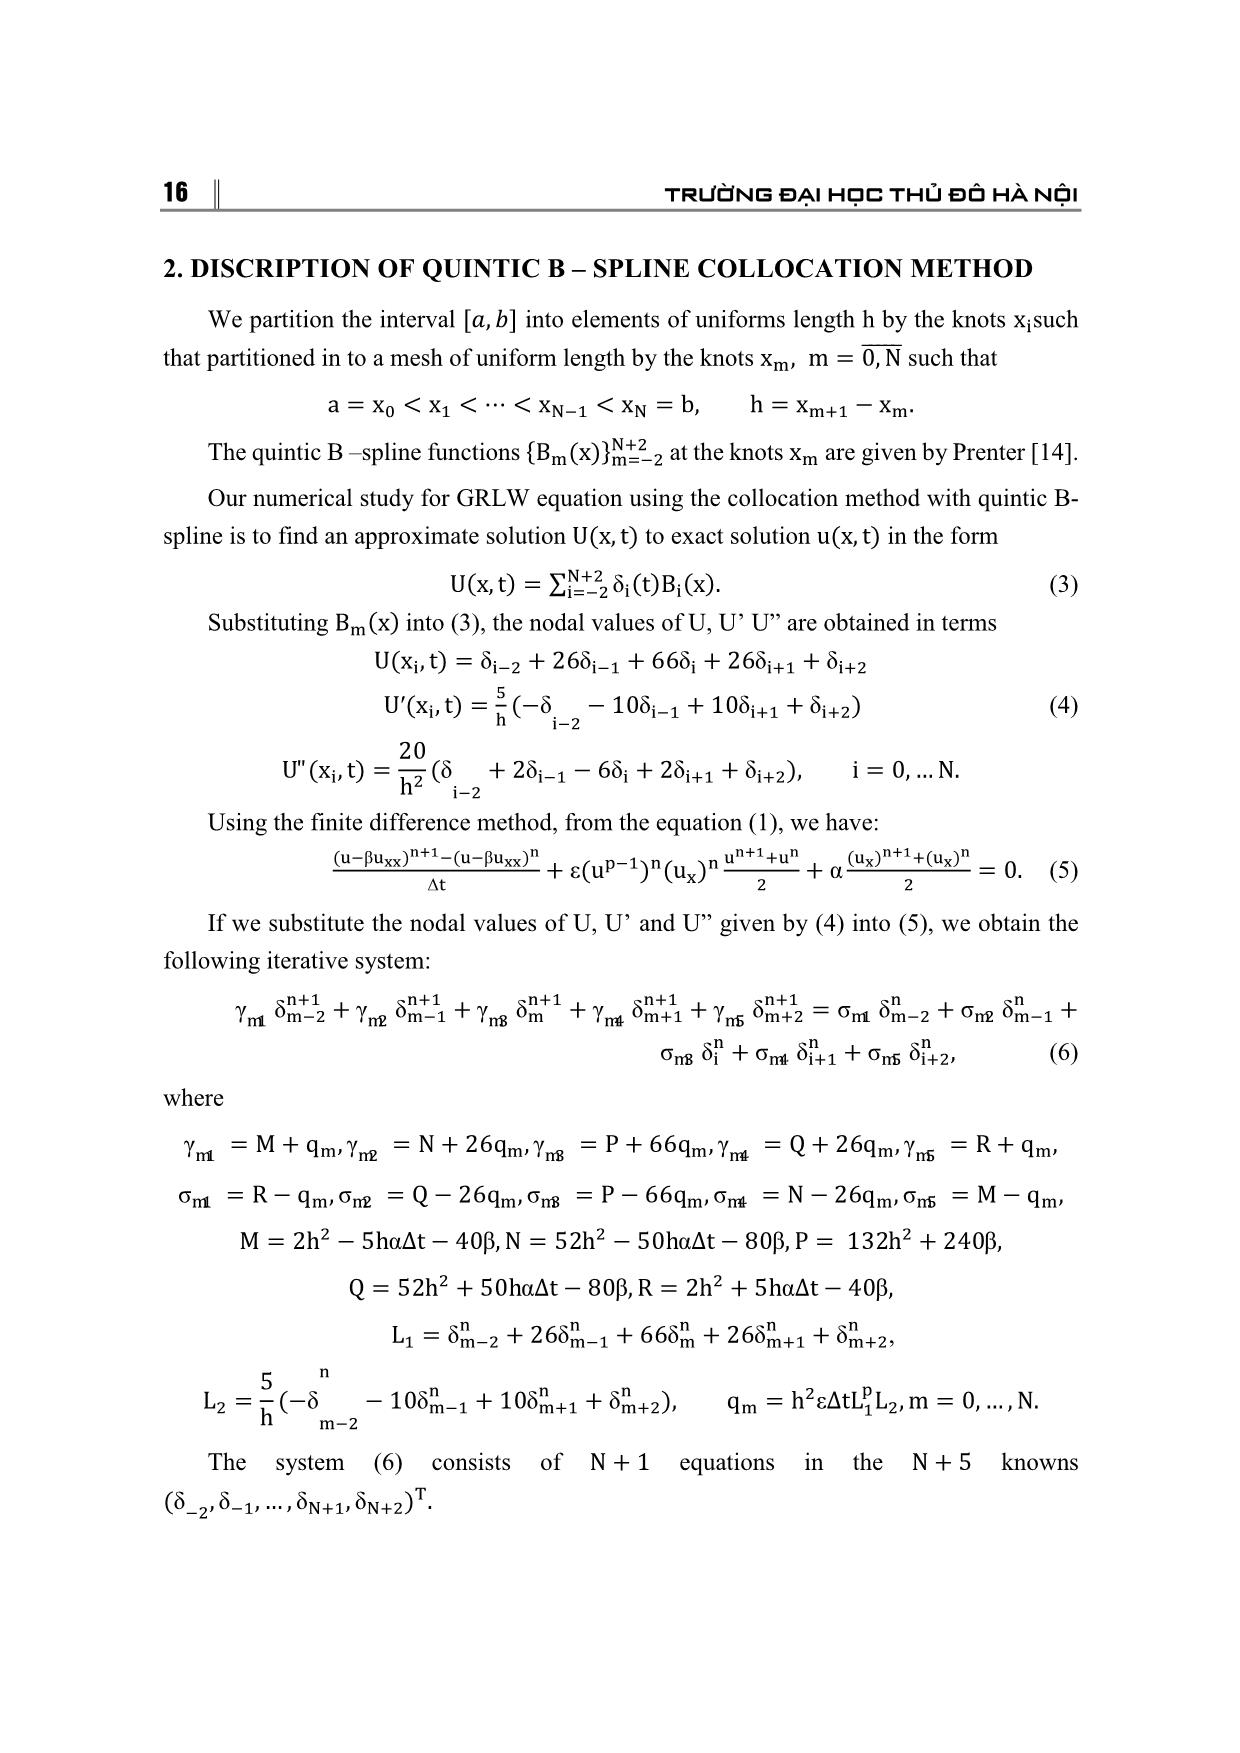 Application of the collocation method with B-spline to the grlw equation trang 2